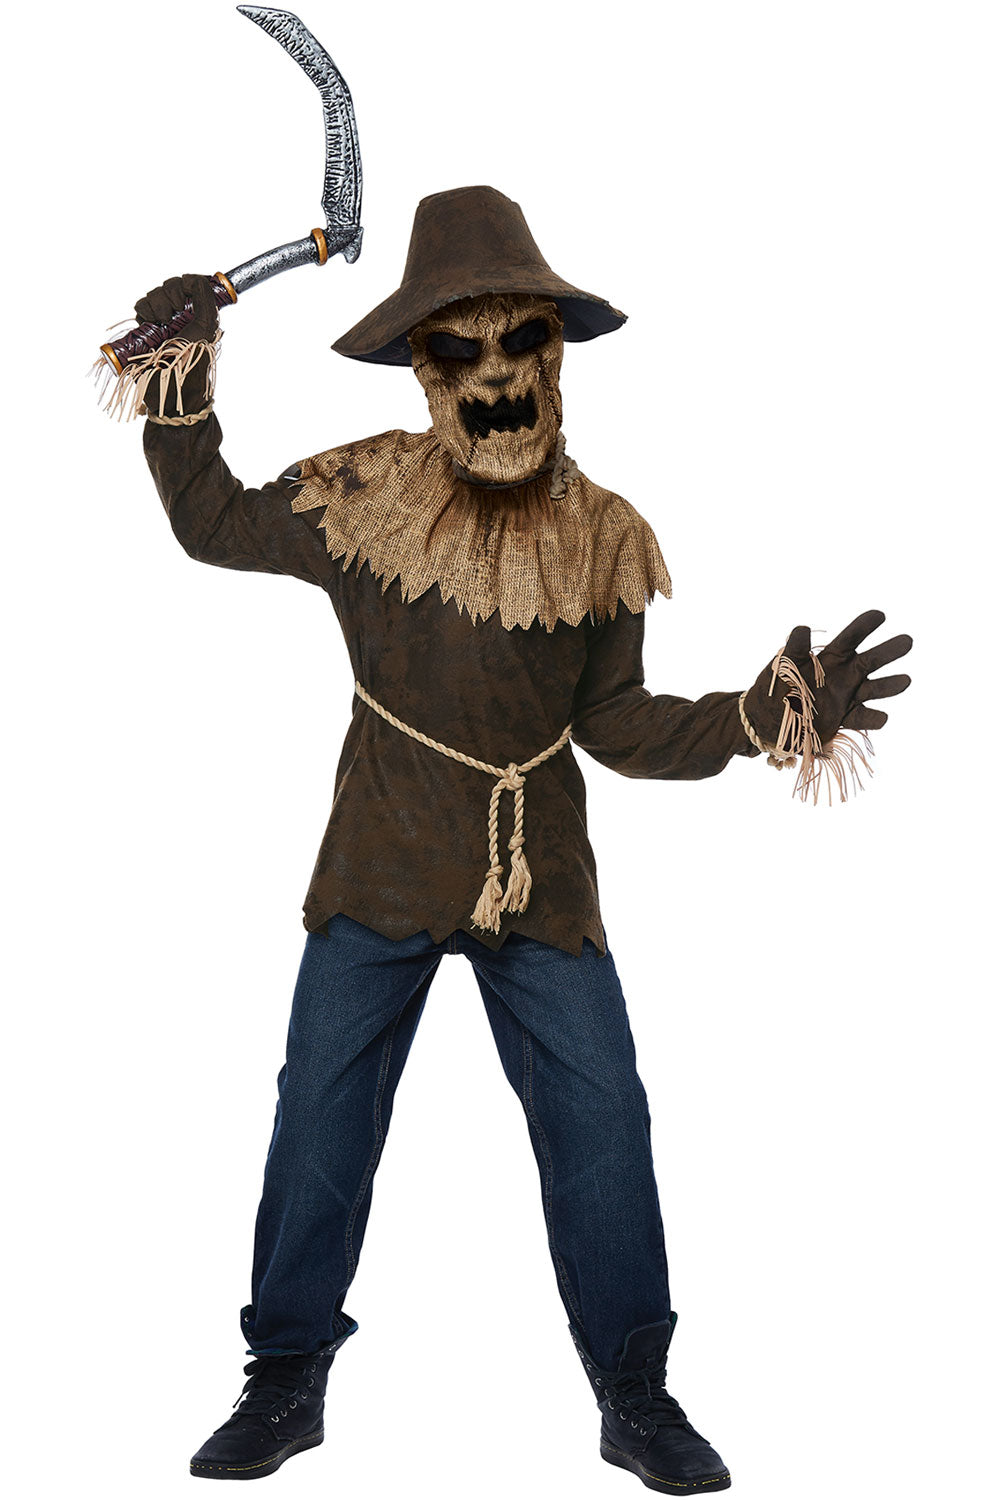 WICKED SCARECROW/CHILD California Costume 00284A